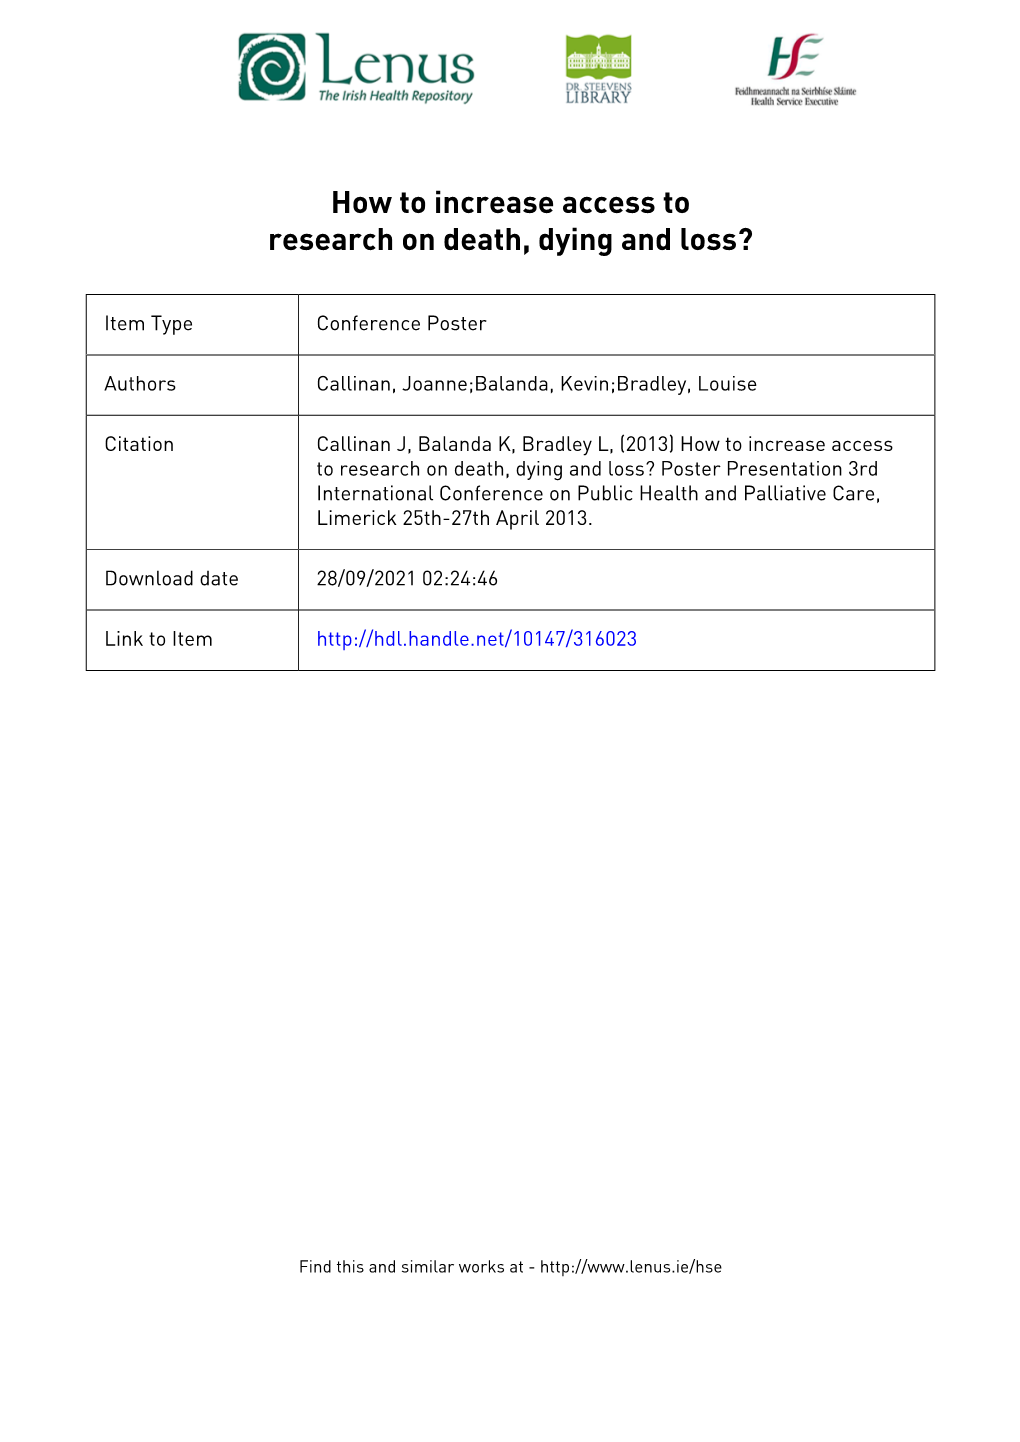 How to Increase Access to Research on Death, Dying, Loss and Care?